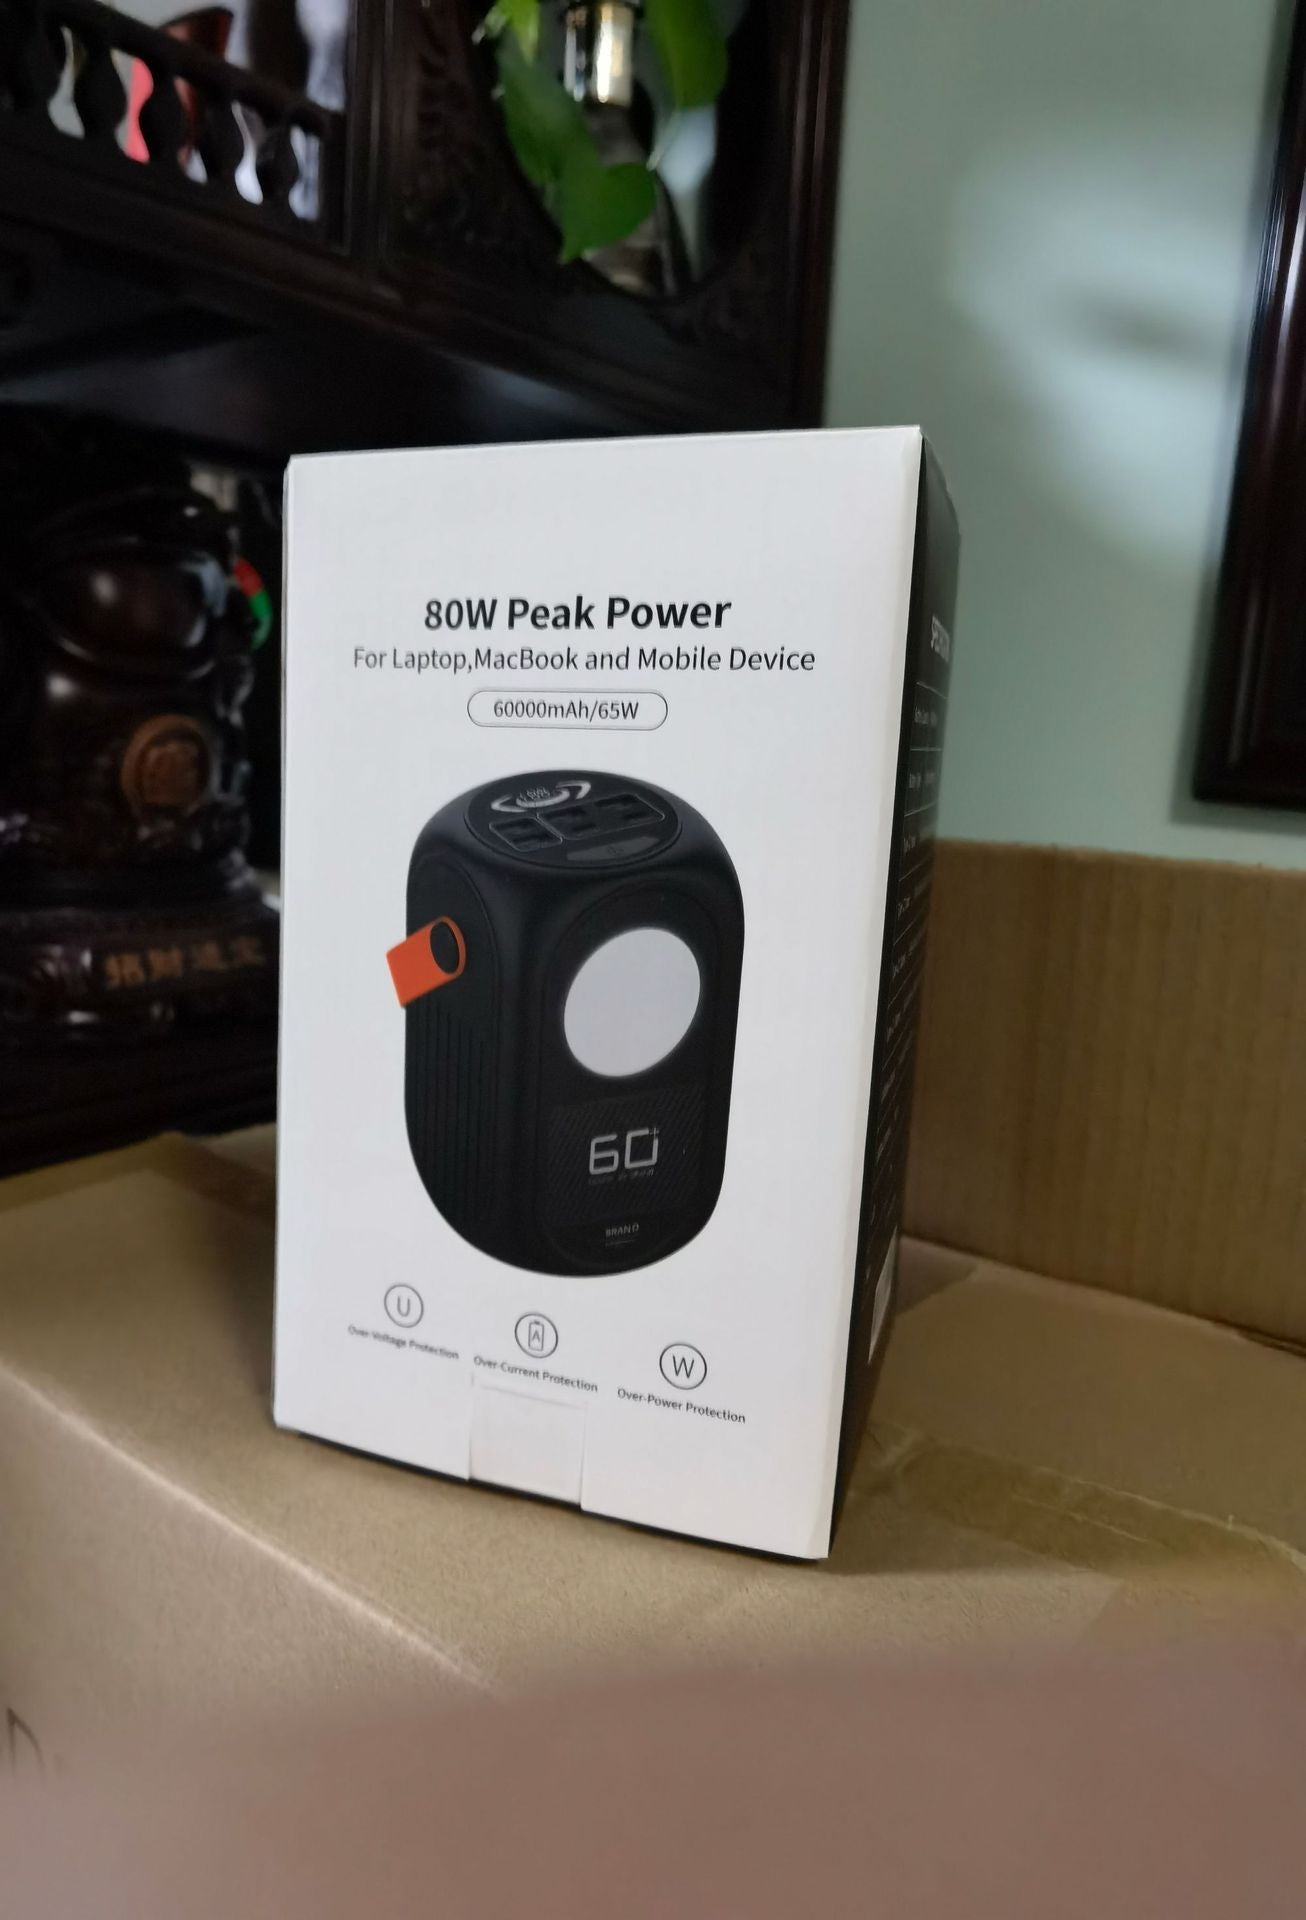 8Ow Peak Power For Laptop MacBook and Mobile Device GOOQ